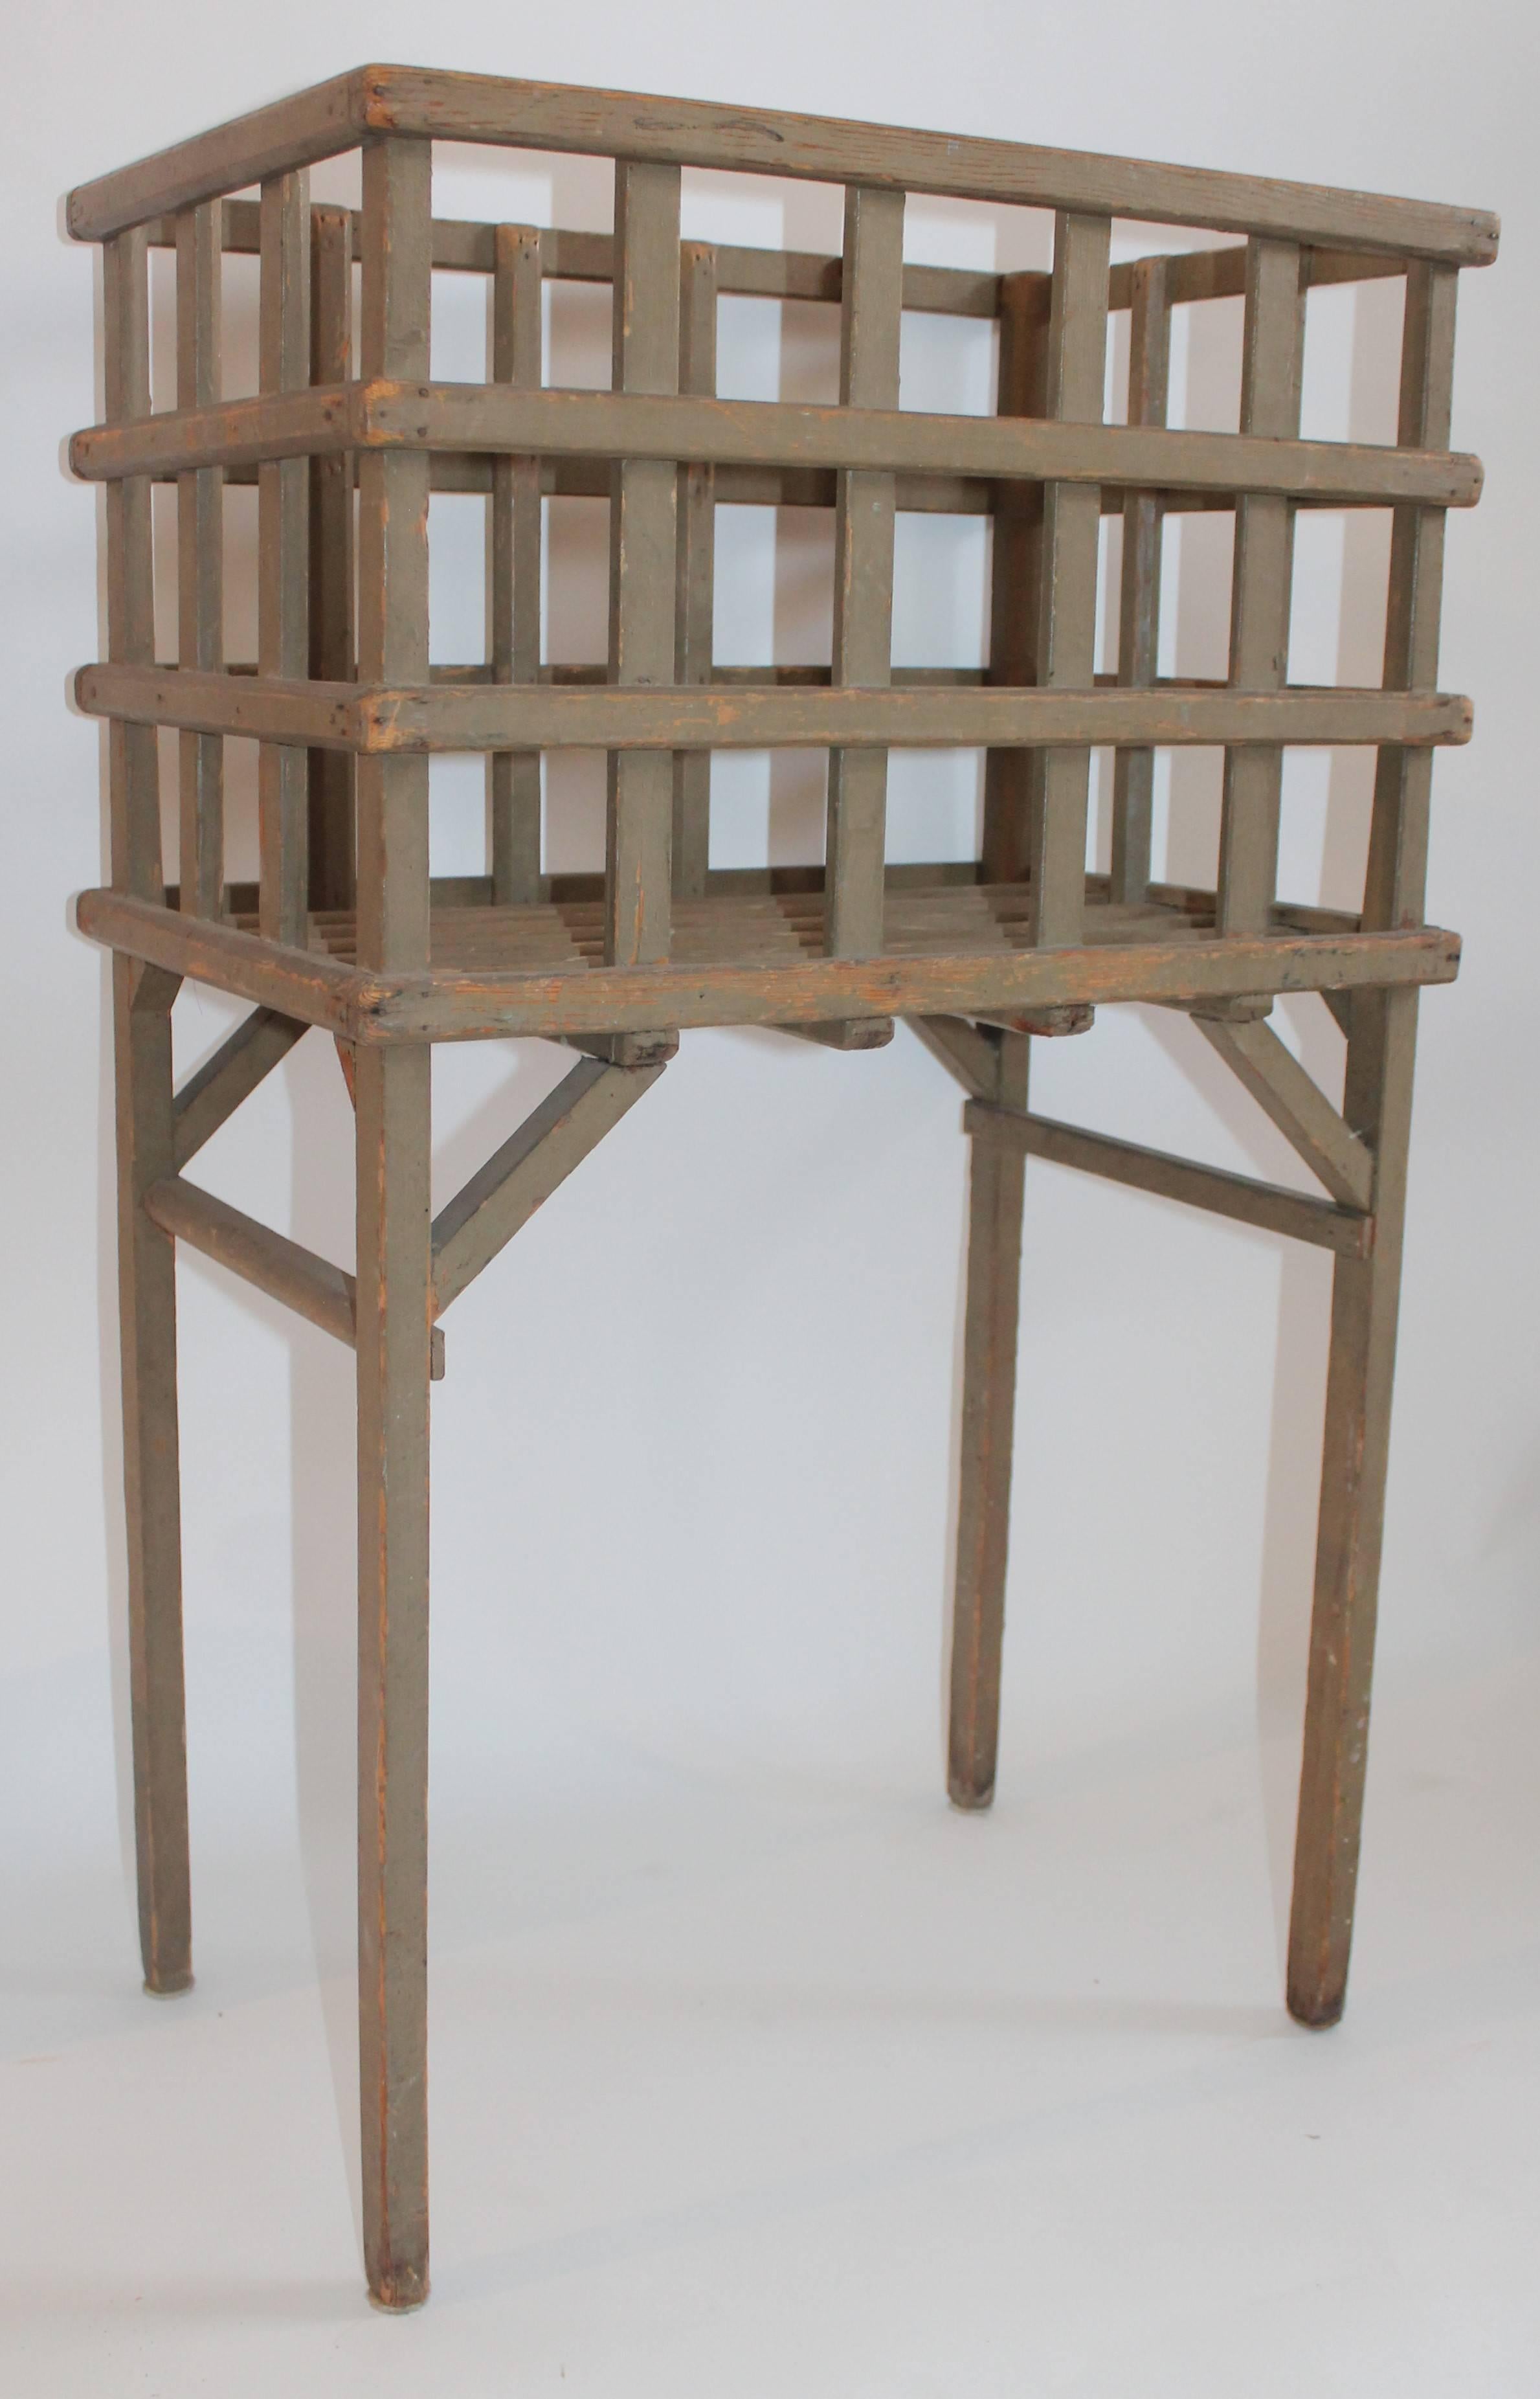 This cool sage green original lattice basket on legs is in fine condition, Great for textiles.